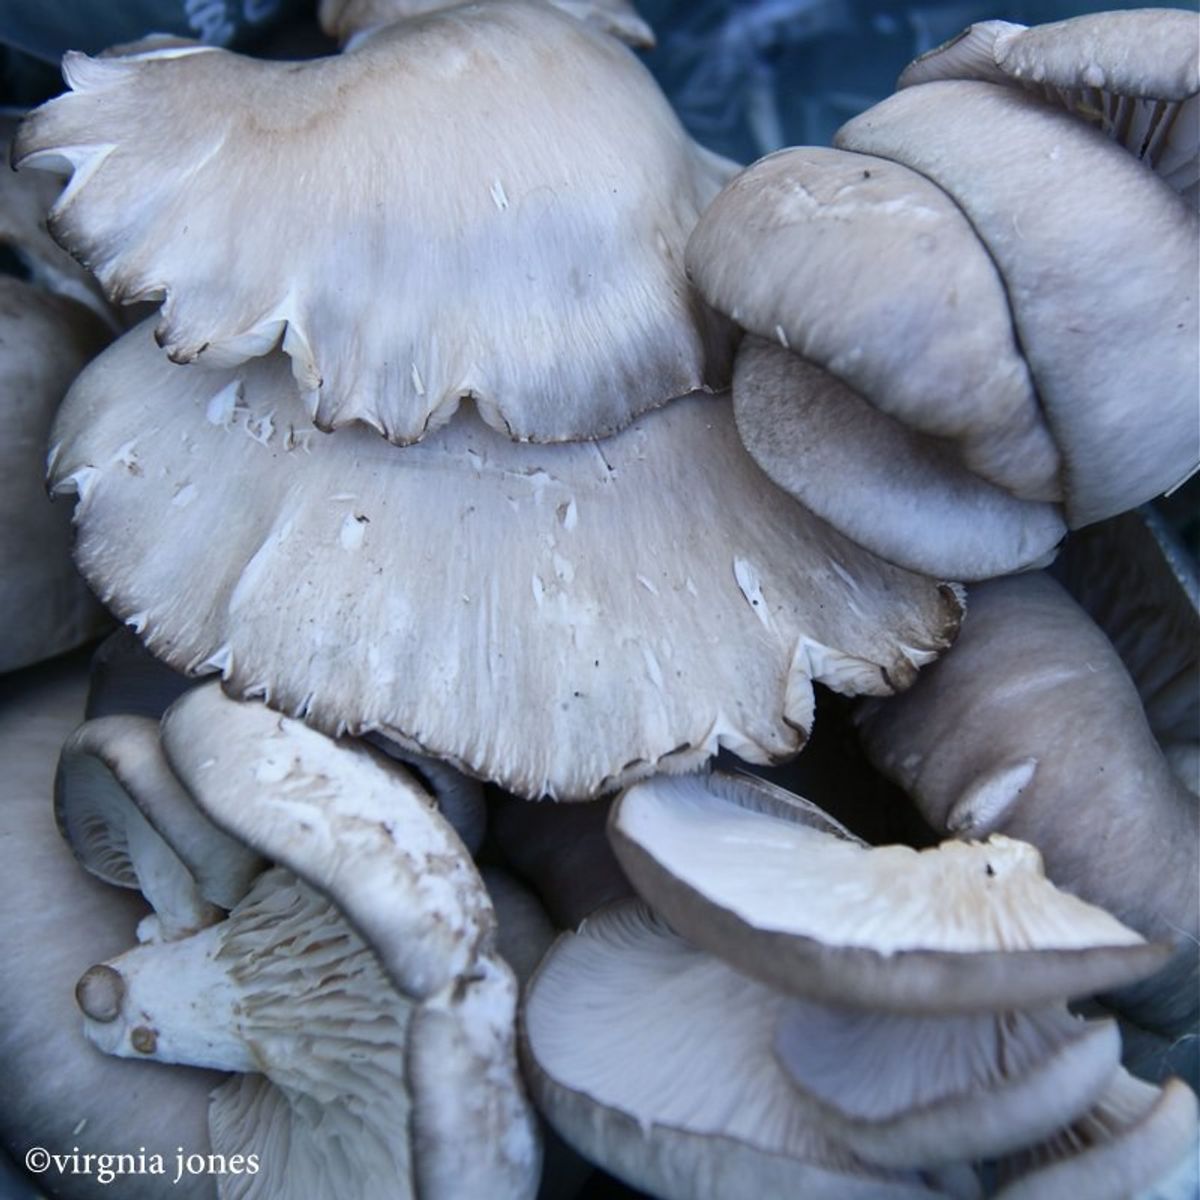 Want to Grow Mushrooms in Your Dorm?